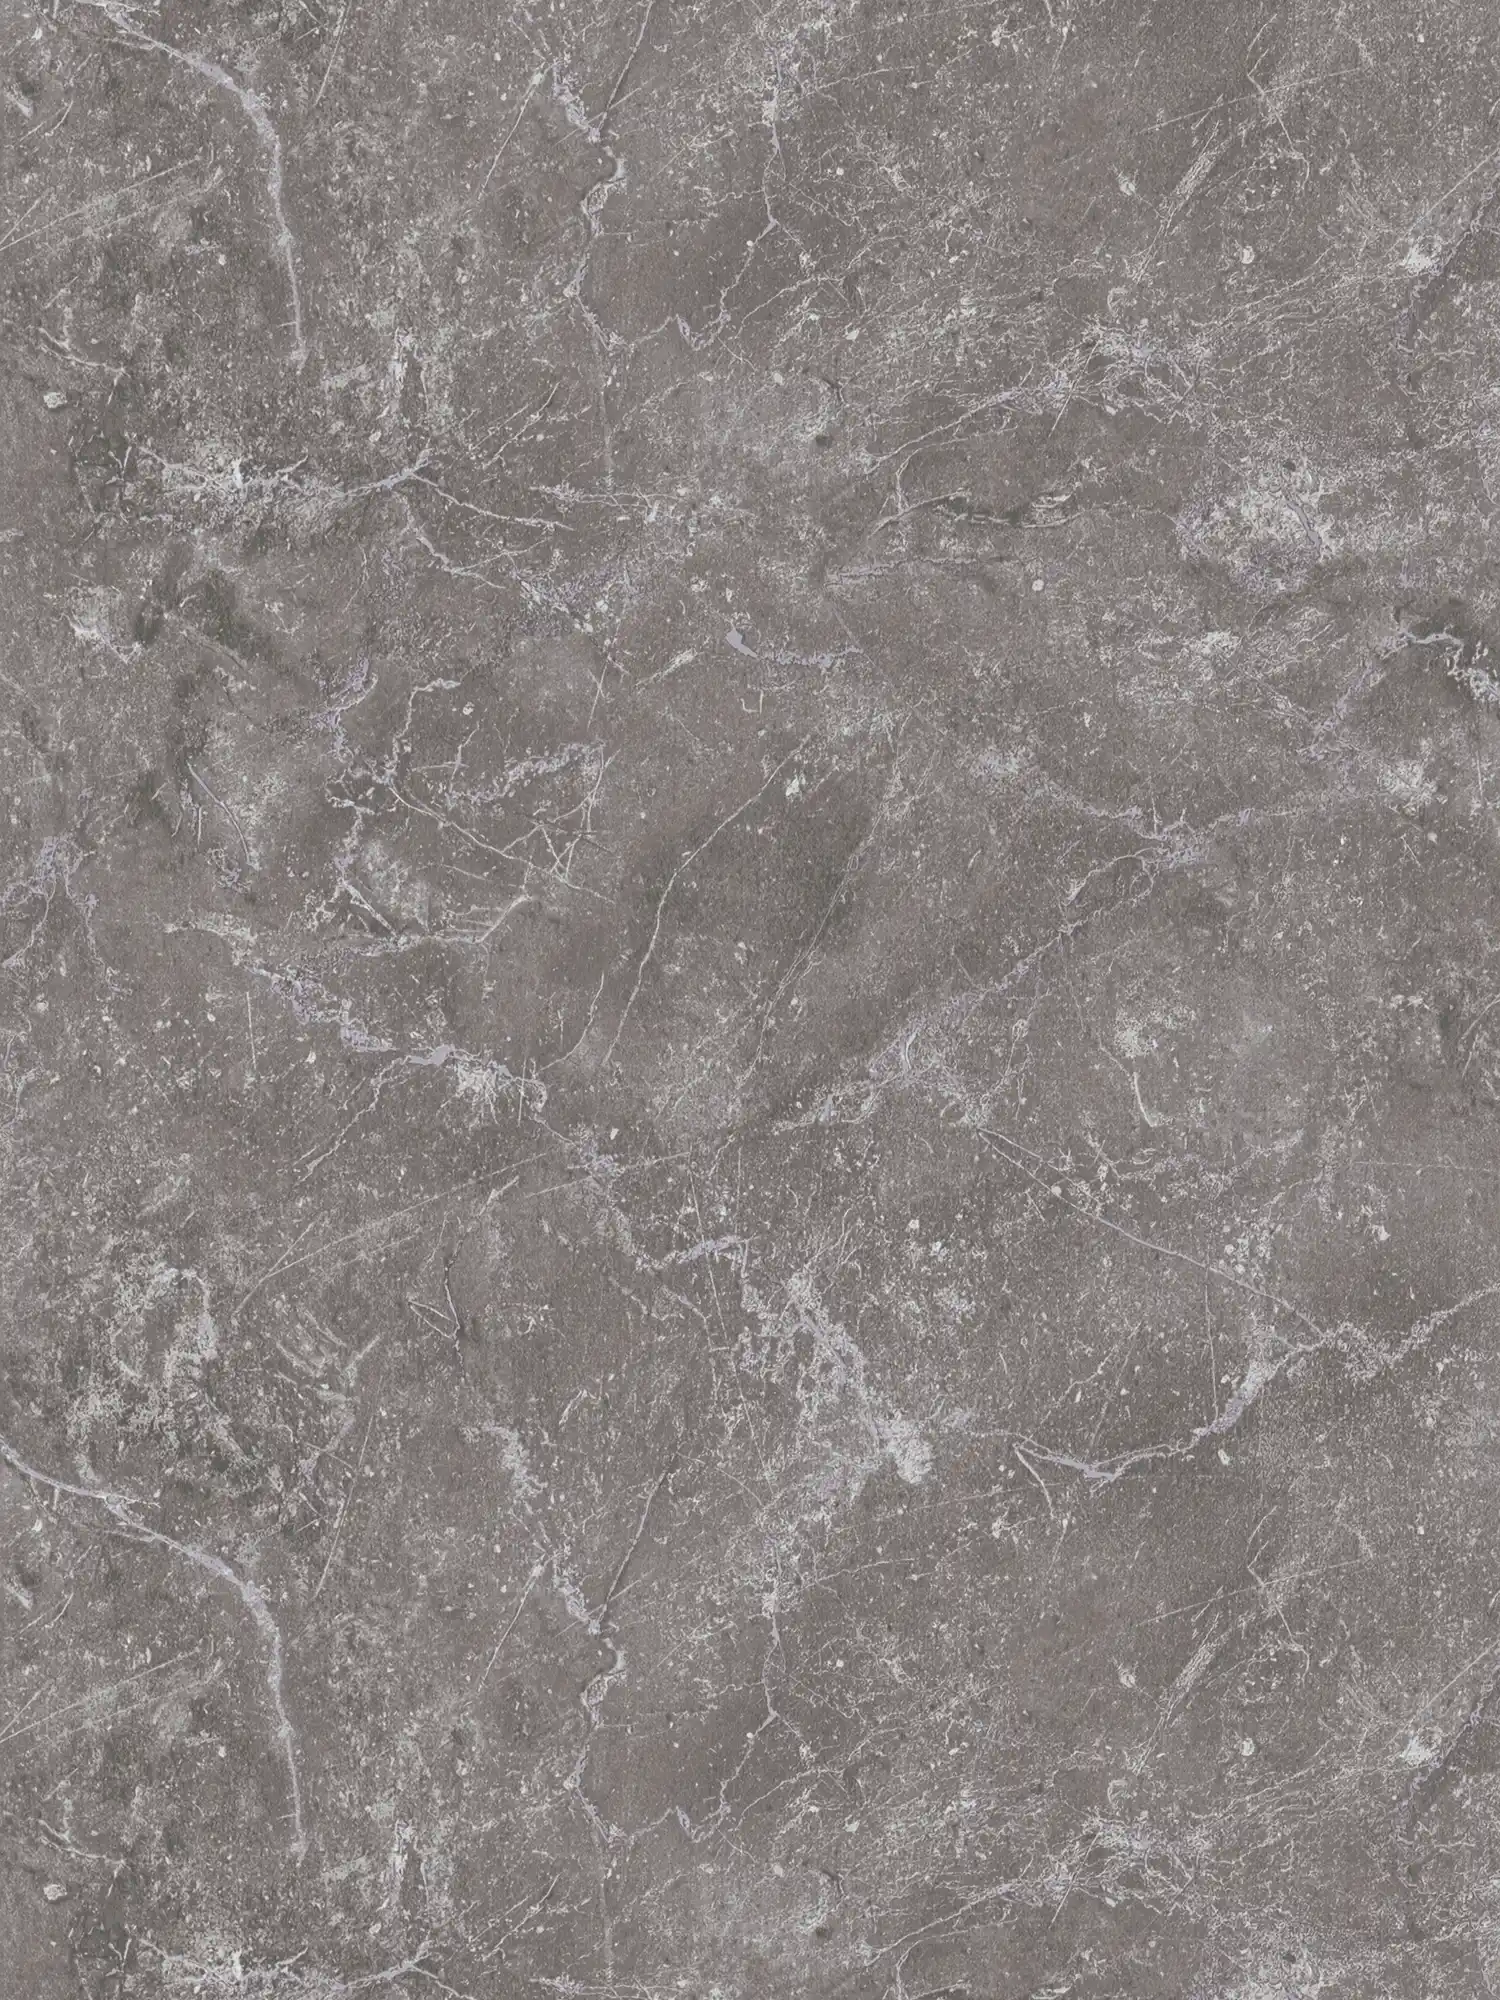 Marble wallpaper grey Design by MICHALSKY
